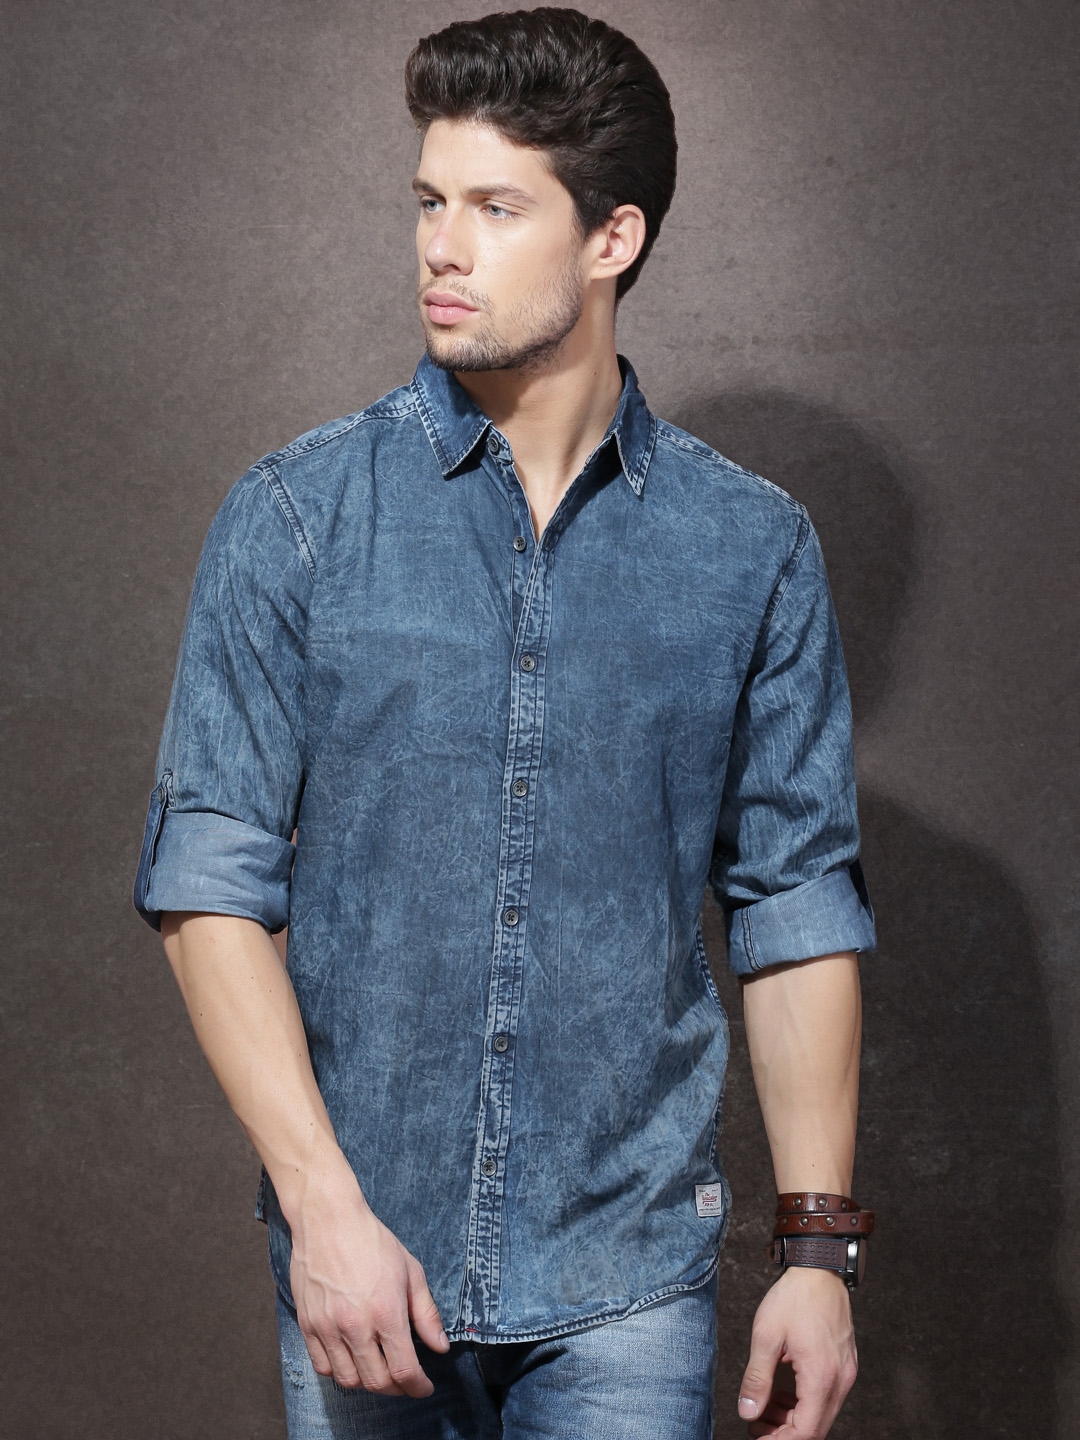 Roadster Jeans Shirts - Buy Roadster Jeans Shirts online in India-totobed.com.vn